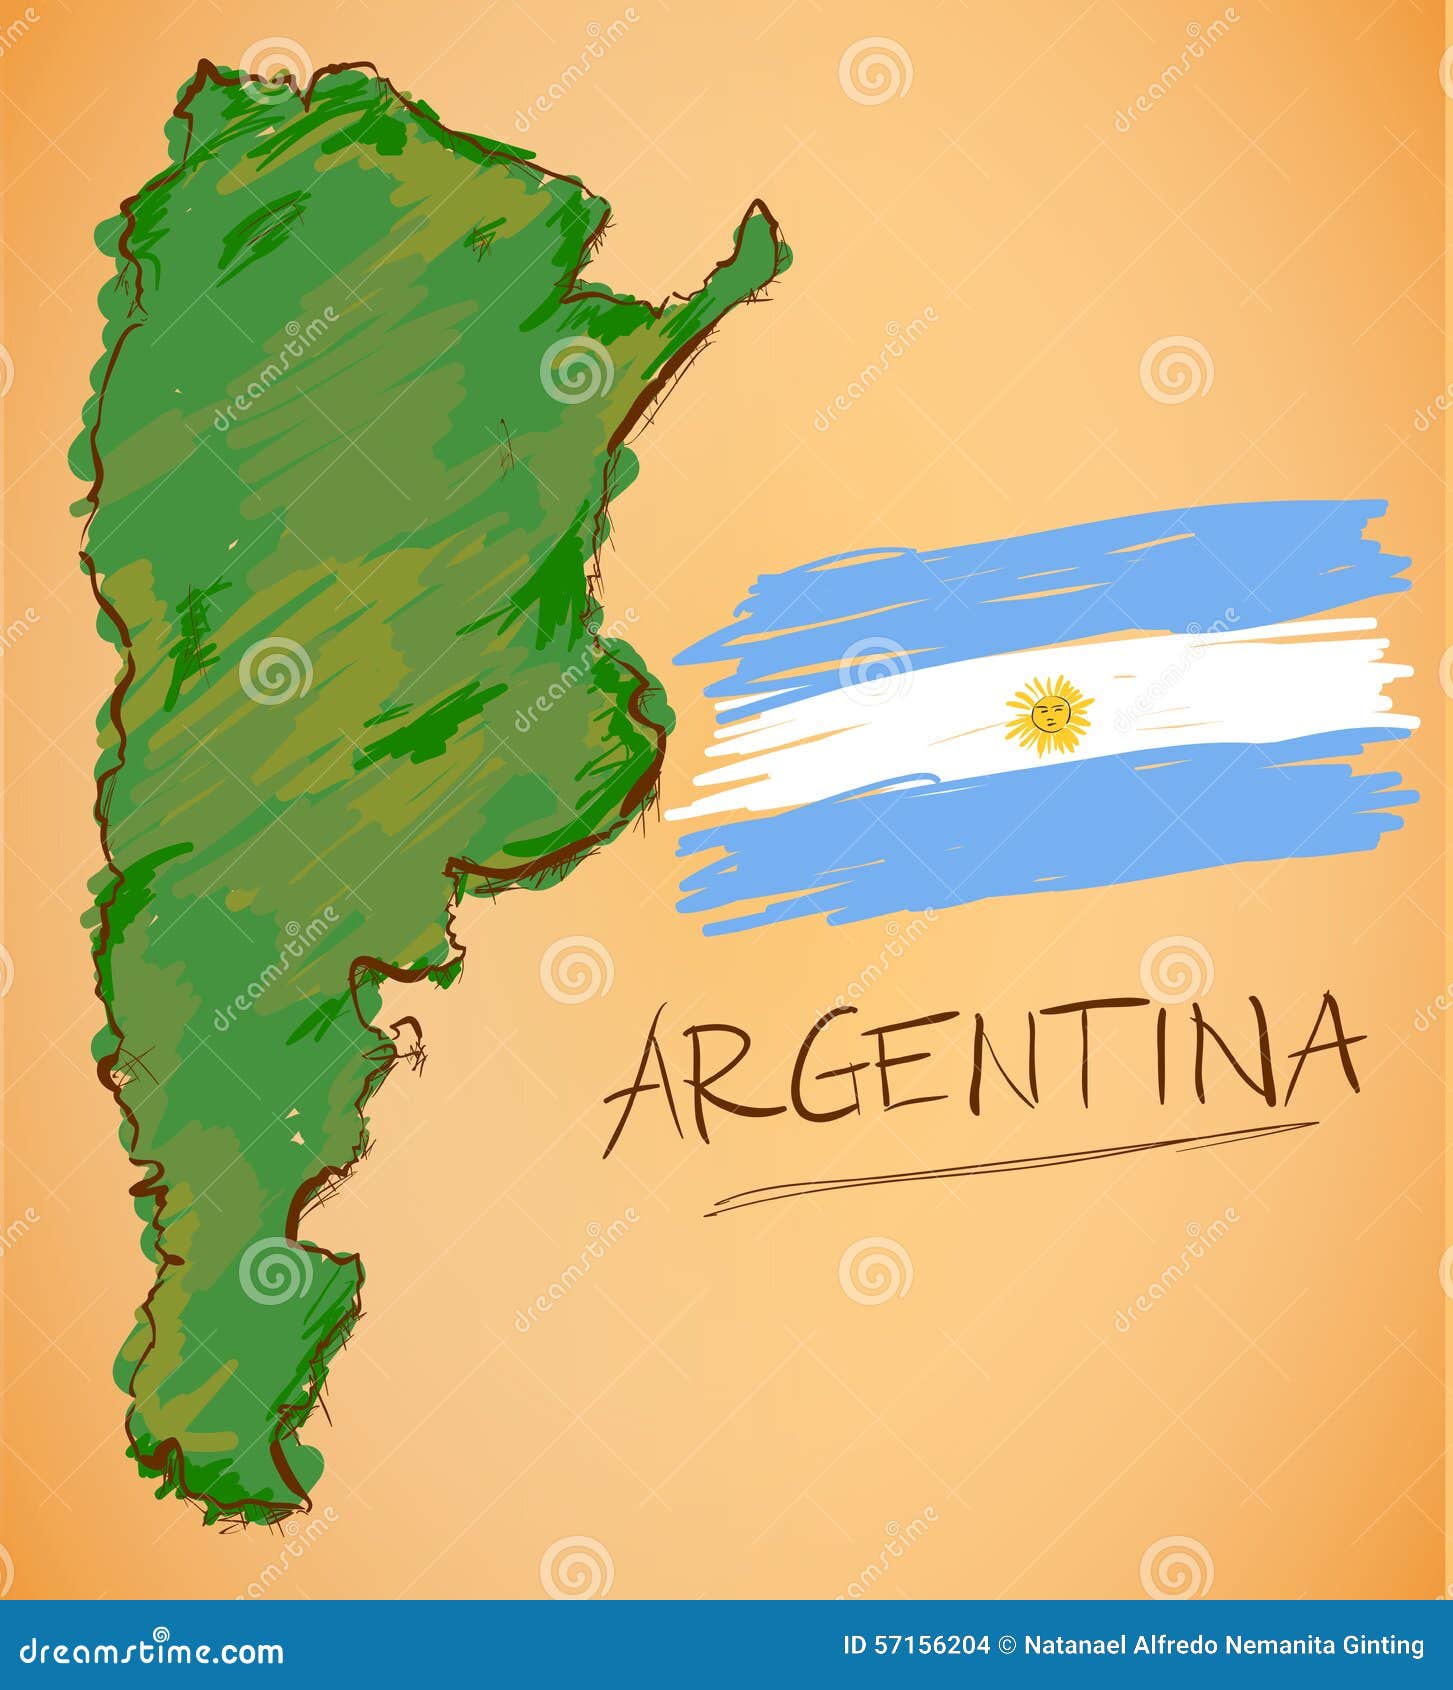 clipart map of argentina - photo #36